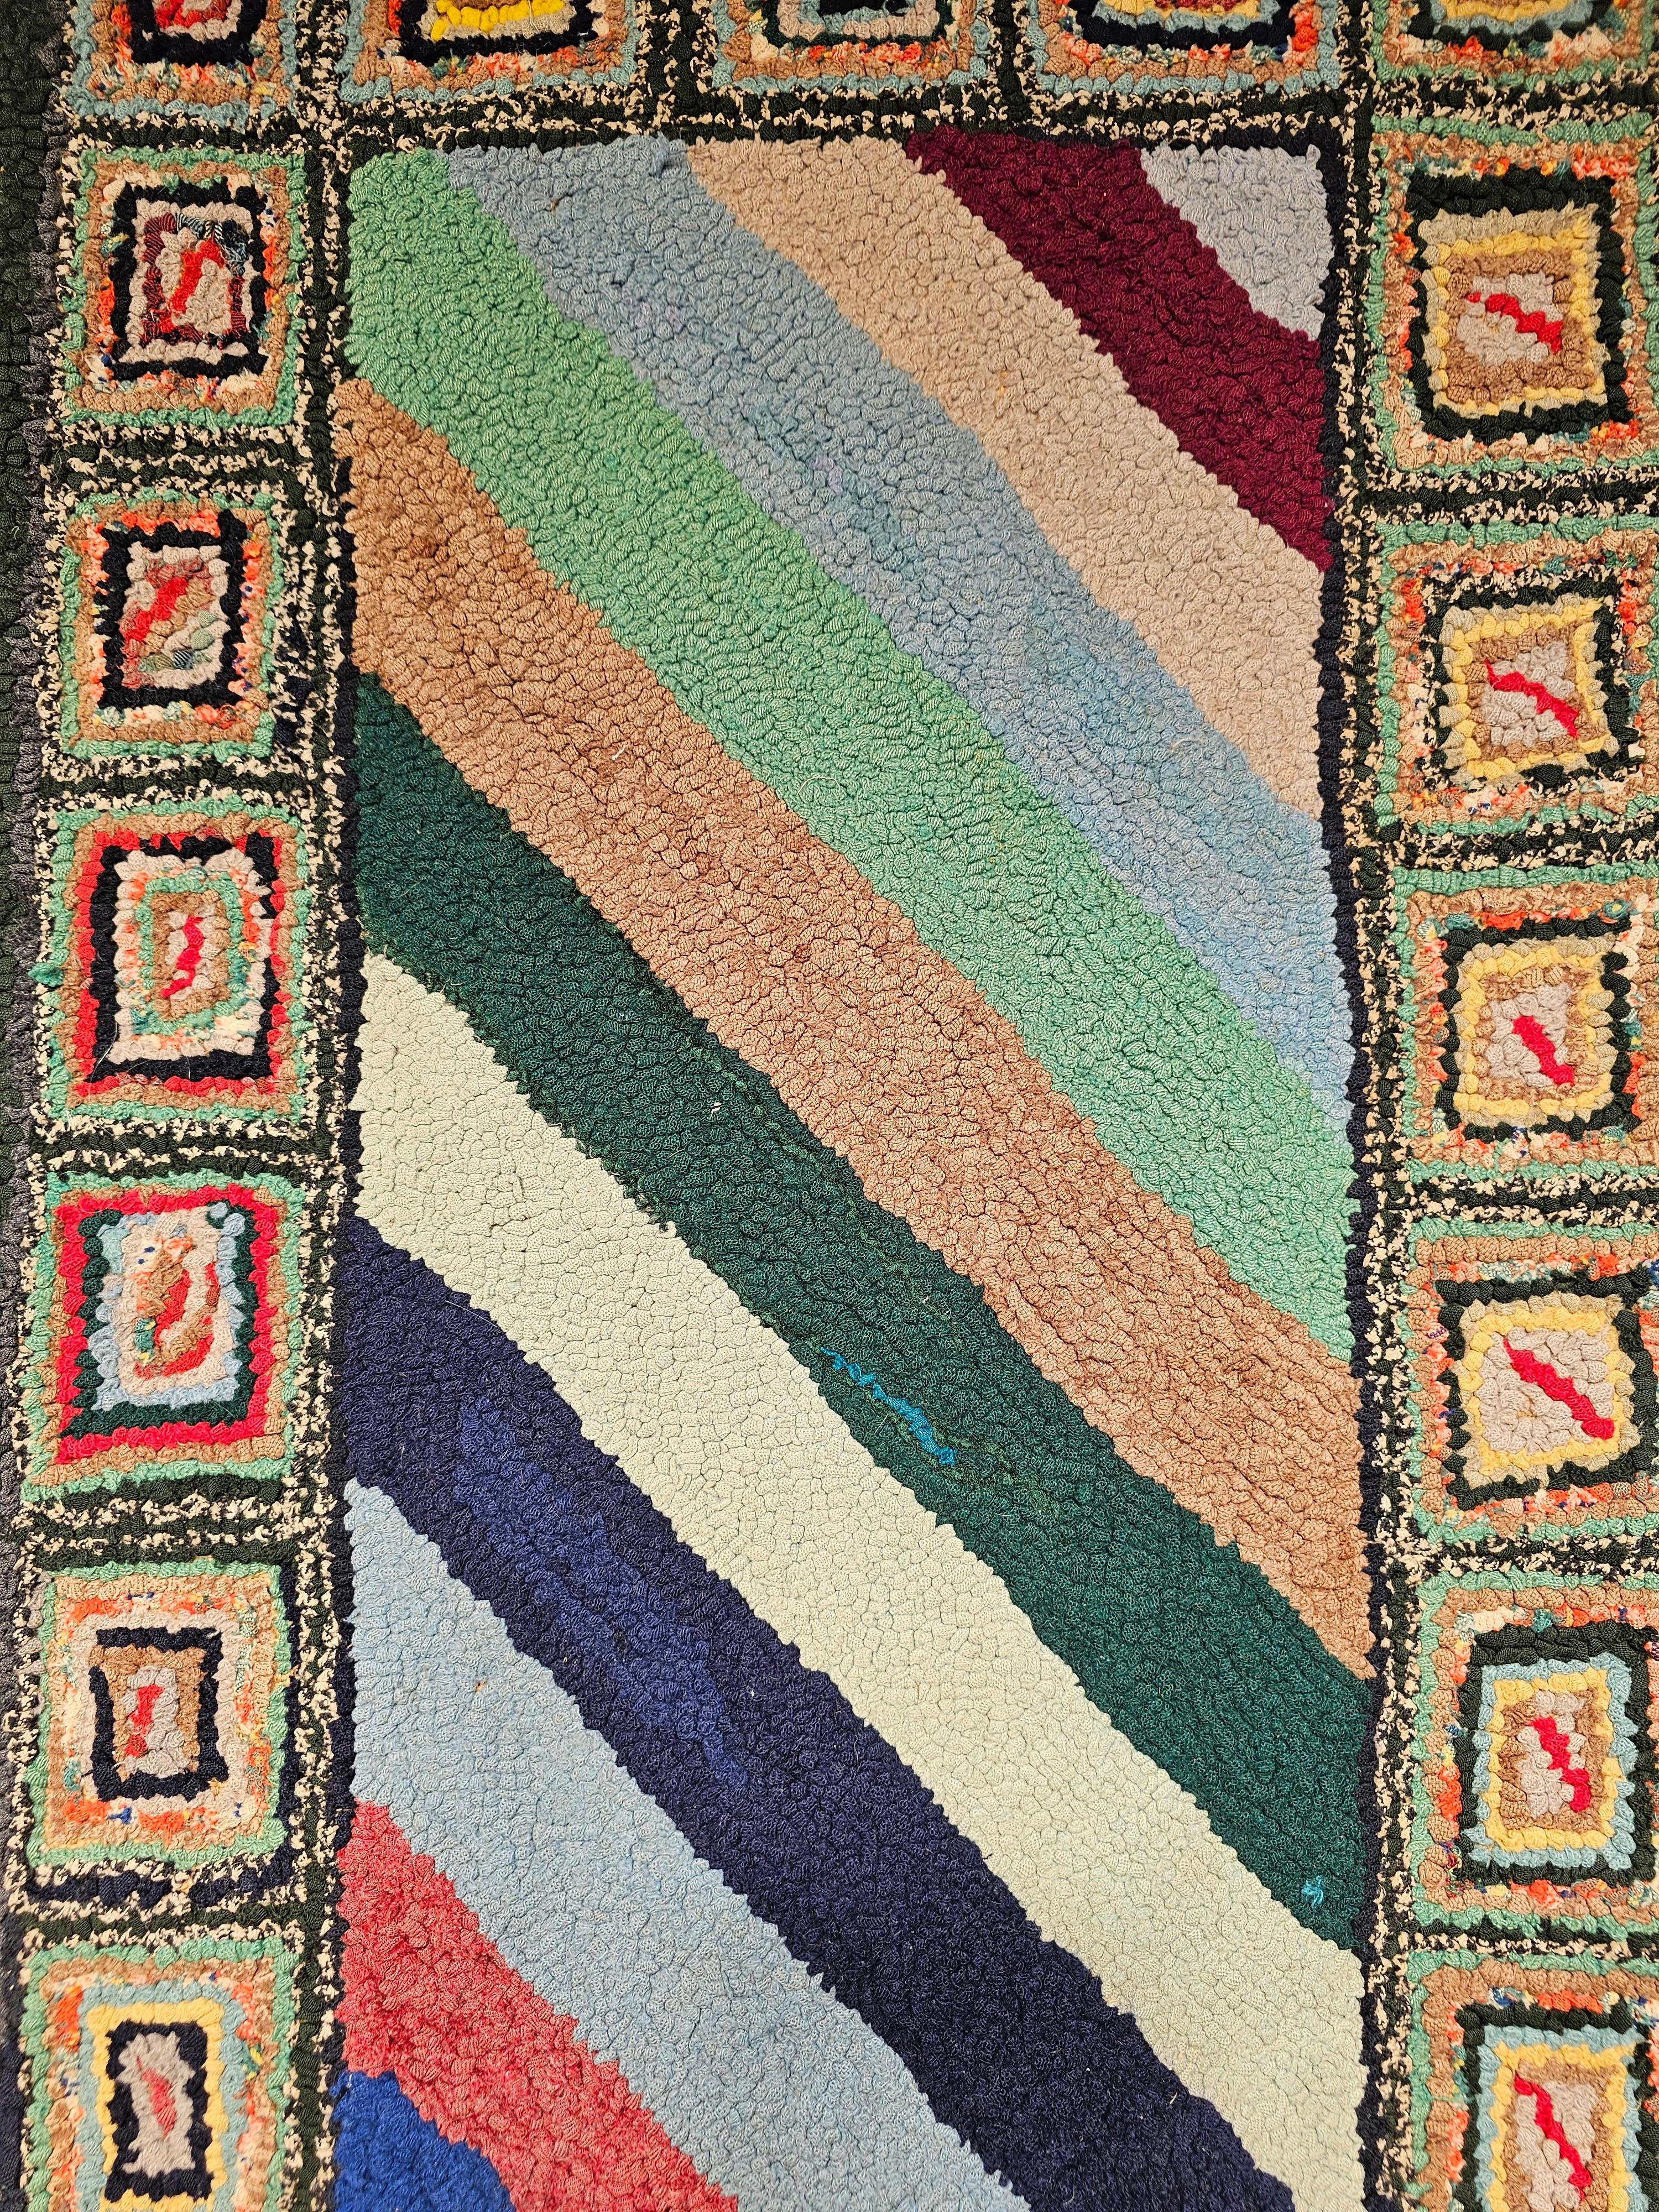 Vintage American Hand Hooked Rug with a Stripe Pattern as Tapestry Wall Art In Good Condition For Sale In Barrington, IL